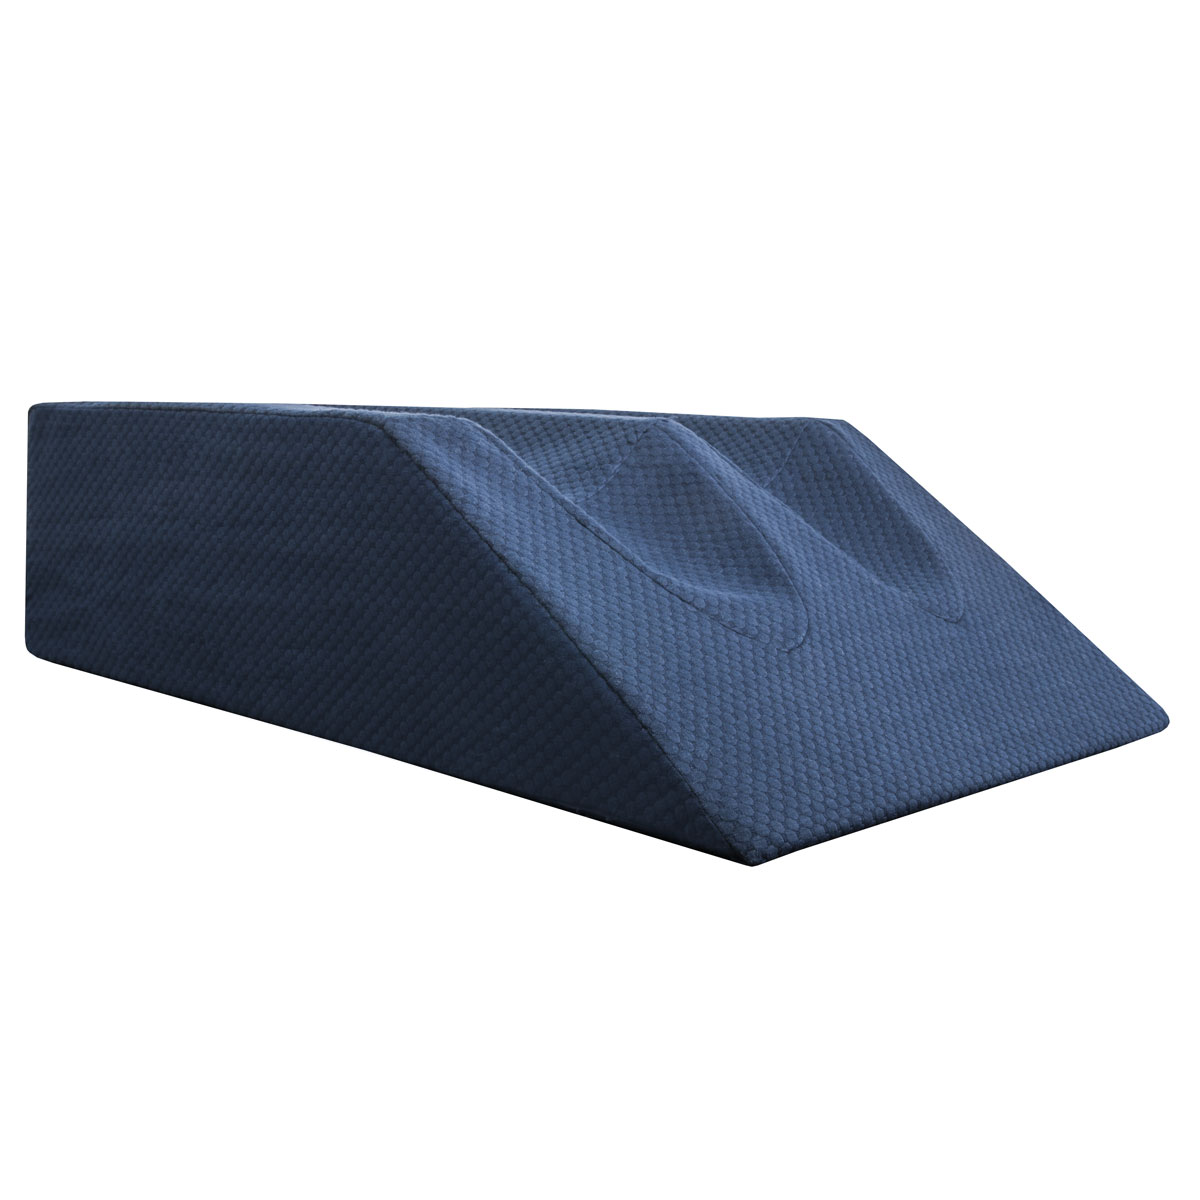 Milliard Foam Leg Elevator Cushion with Washable Cover, Support